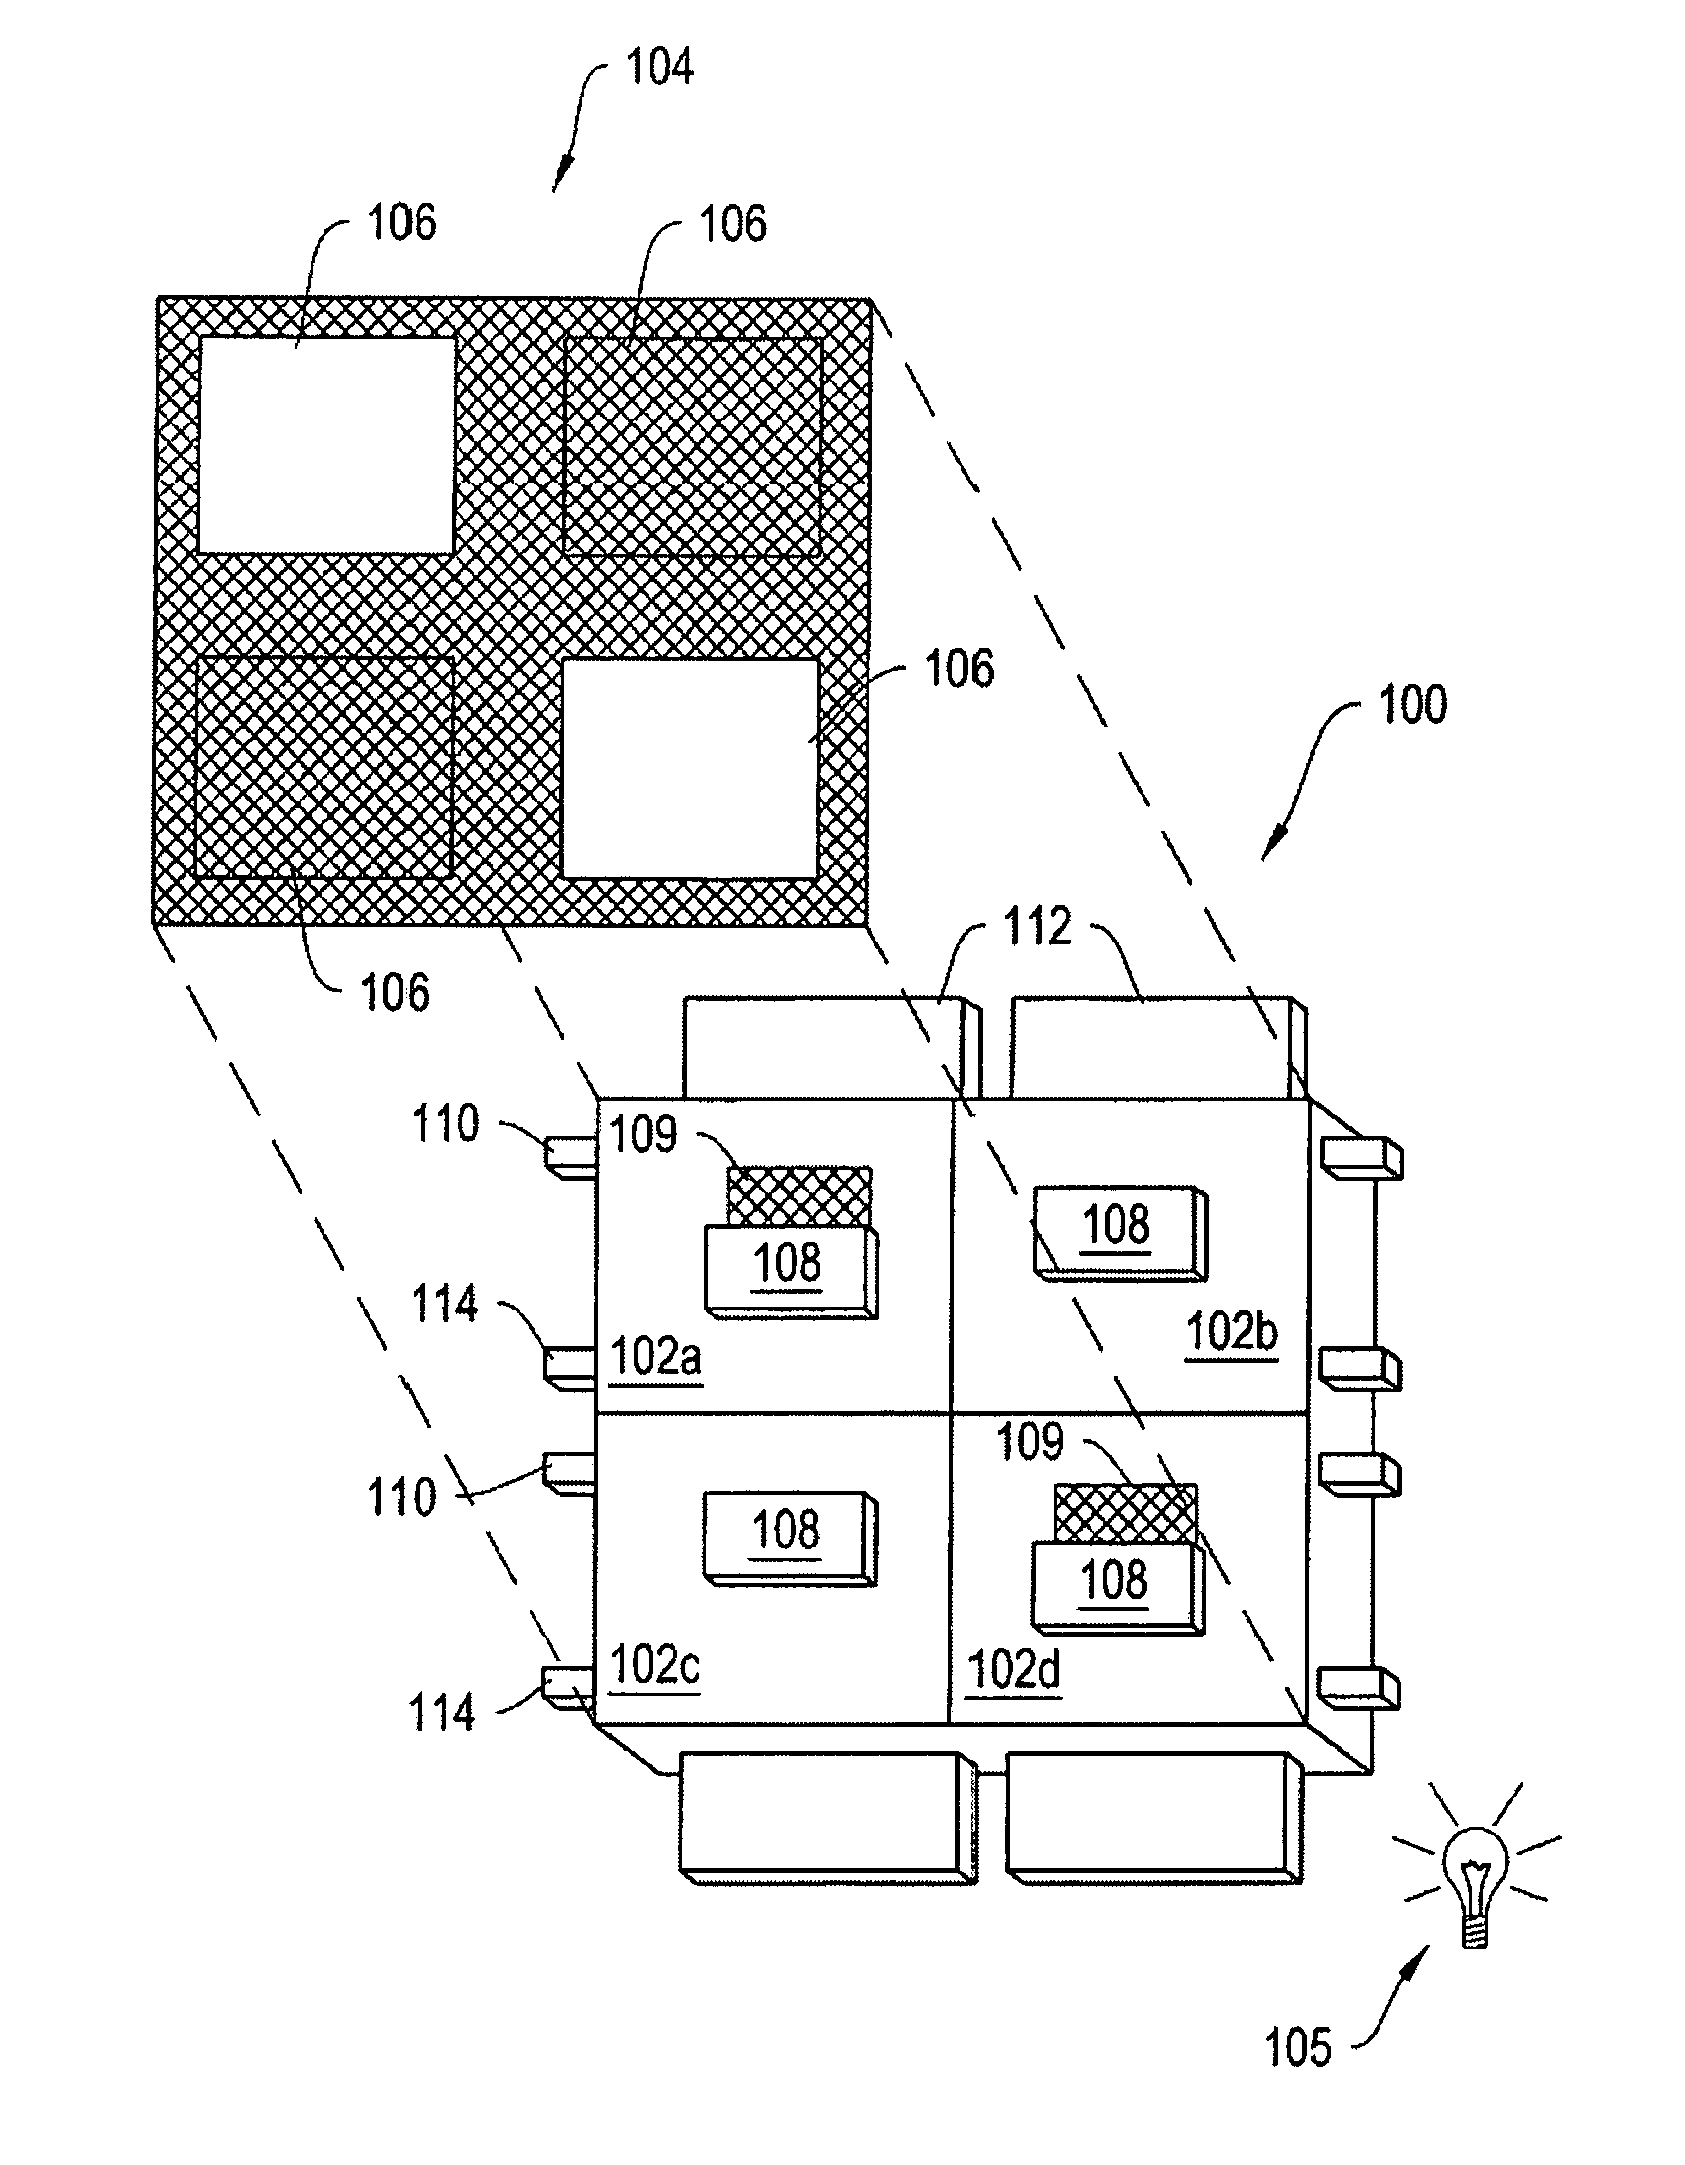 Direct-view MEMS display devices and methods for generating images thereon